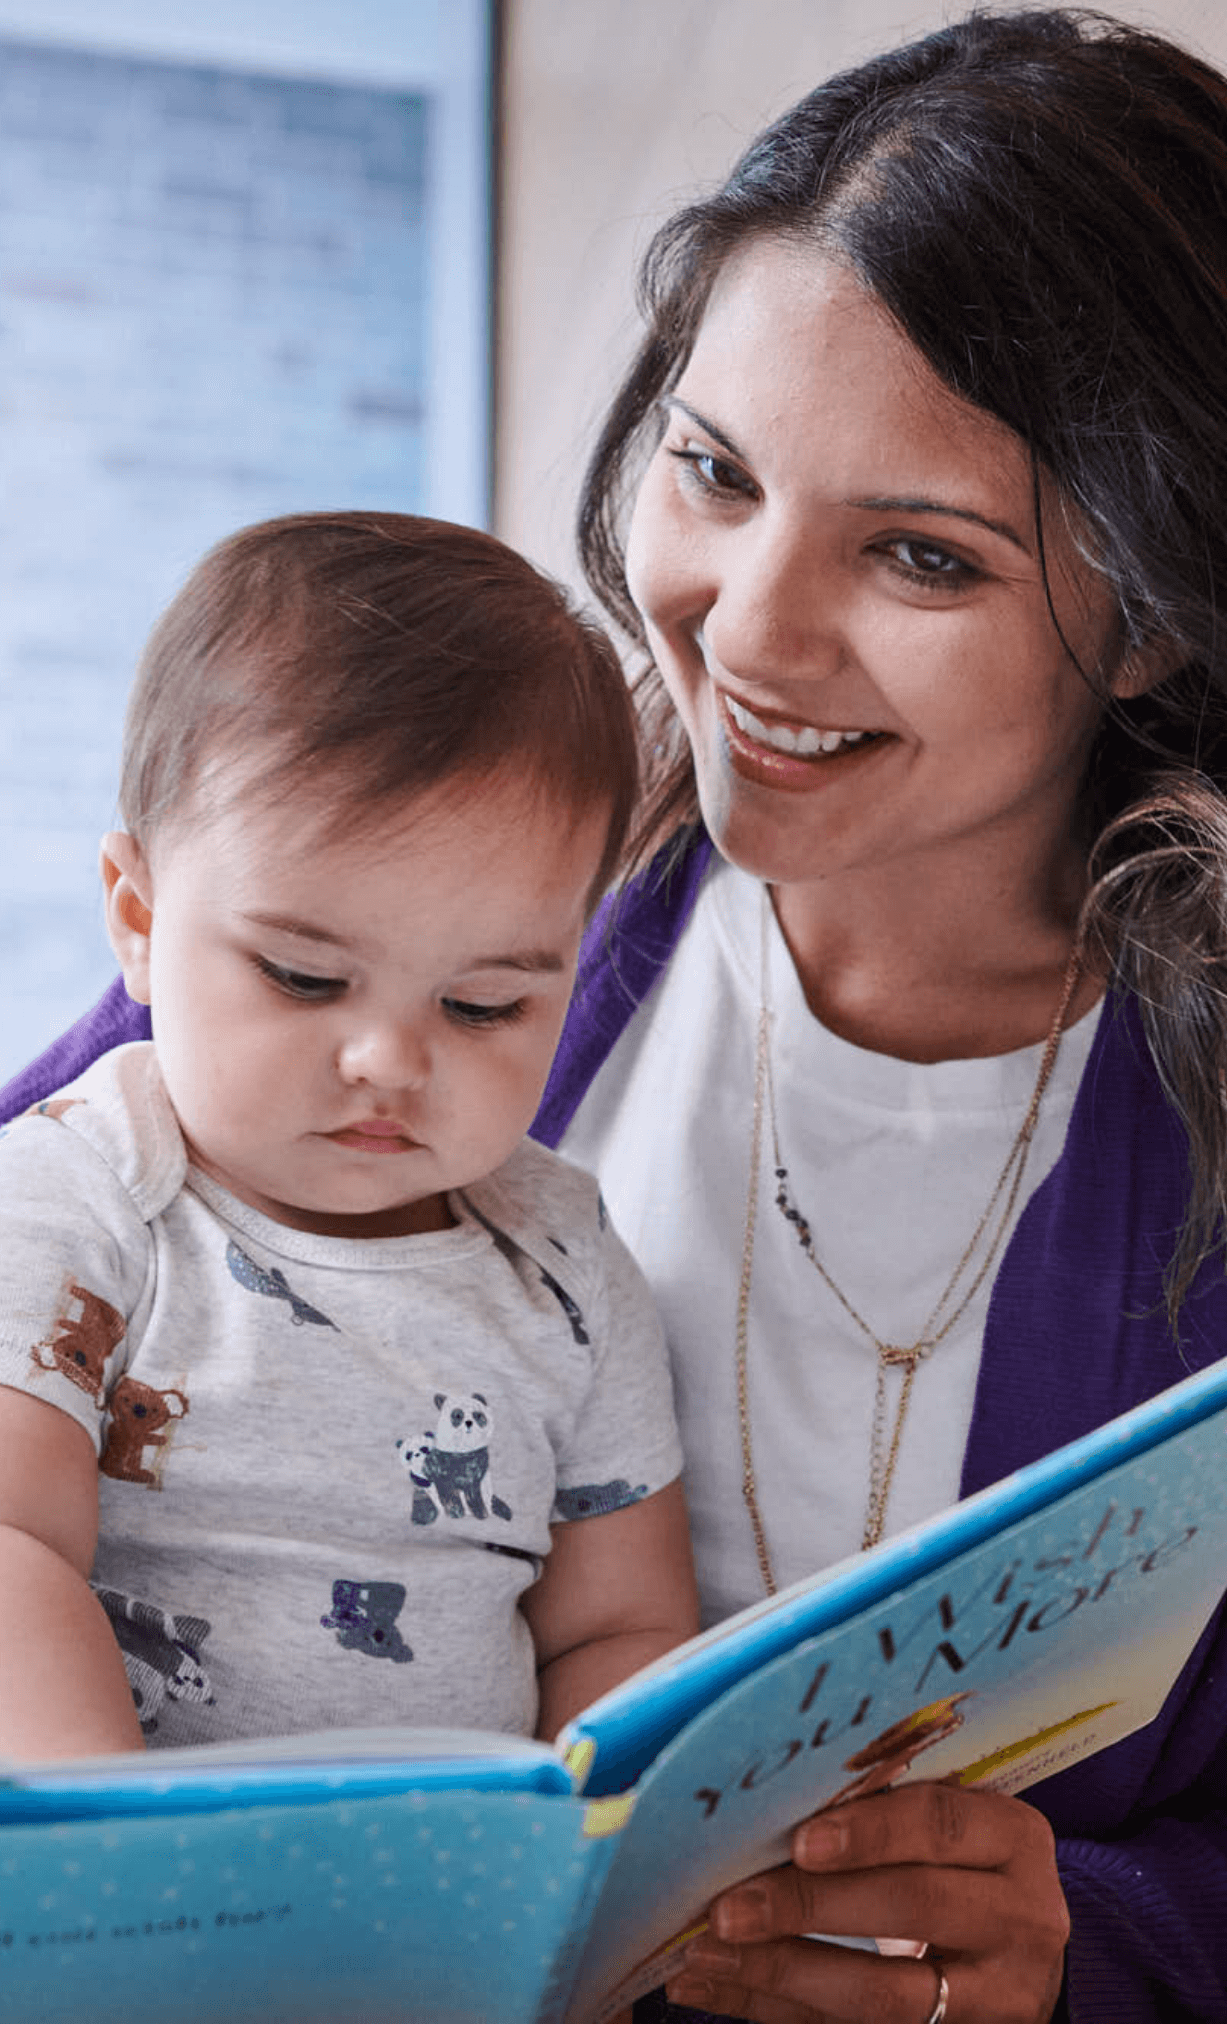 mother reads a book to the baby